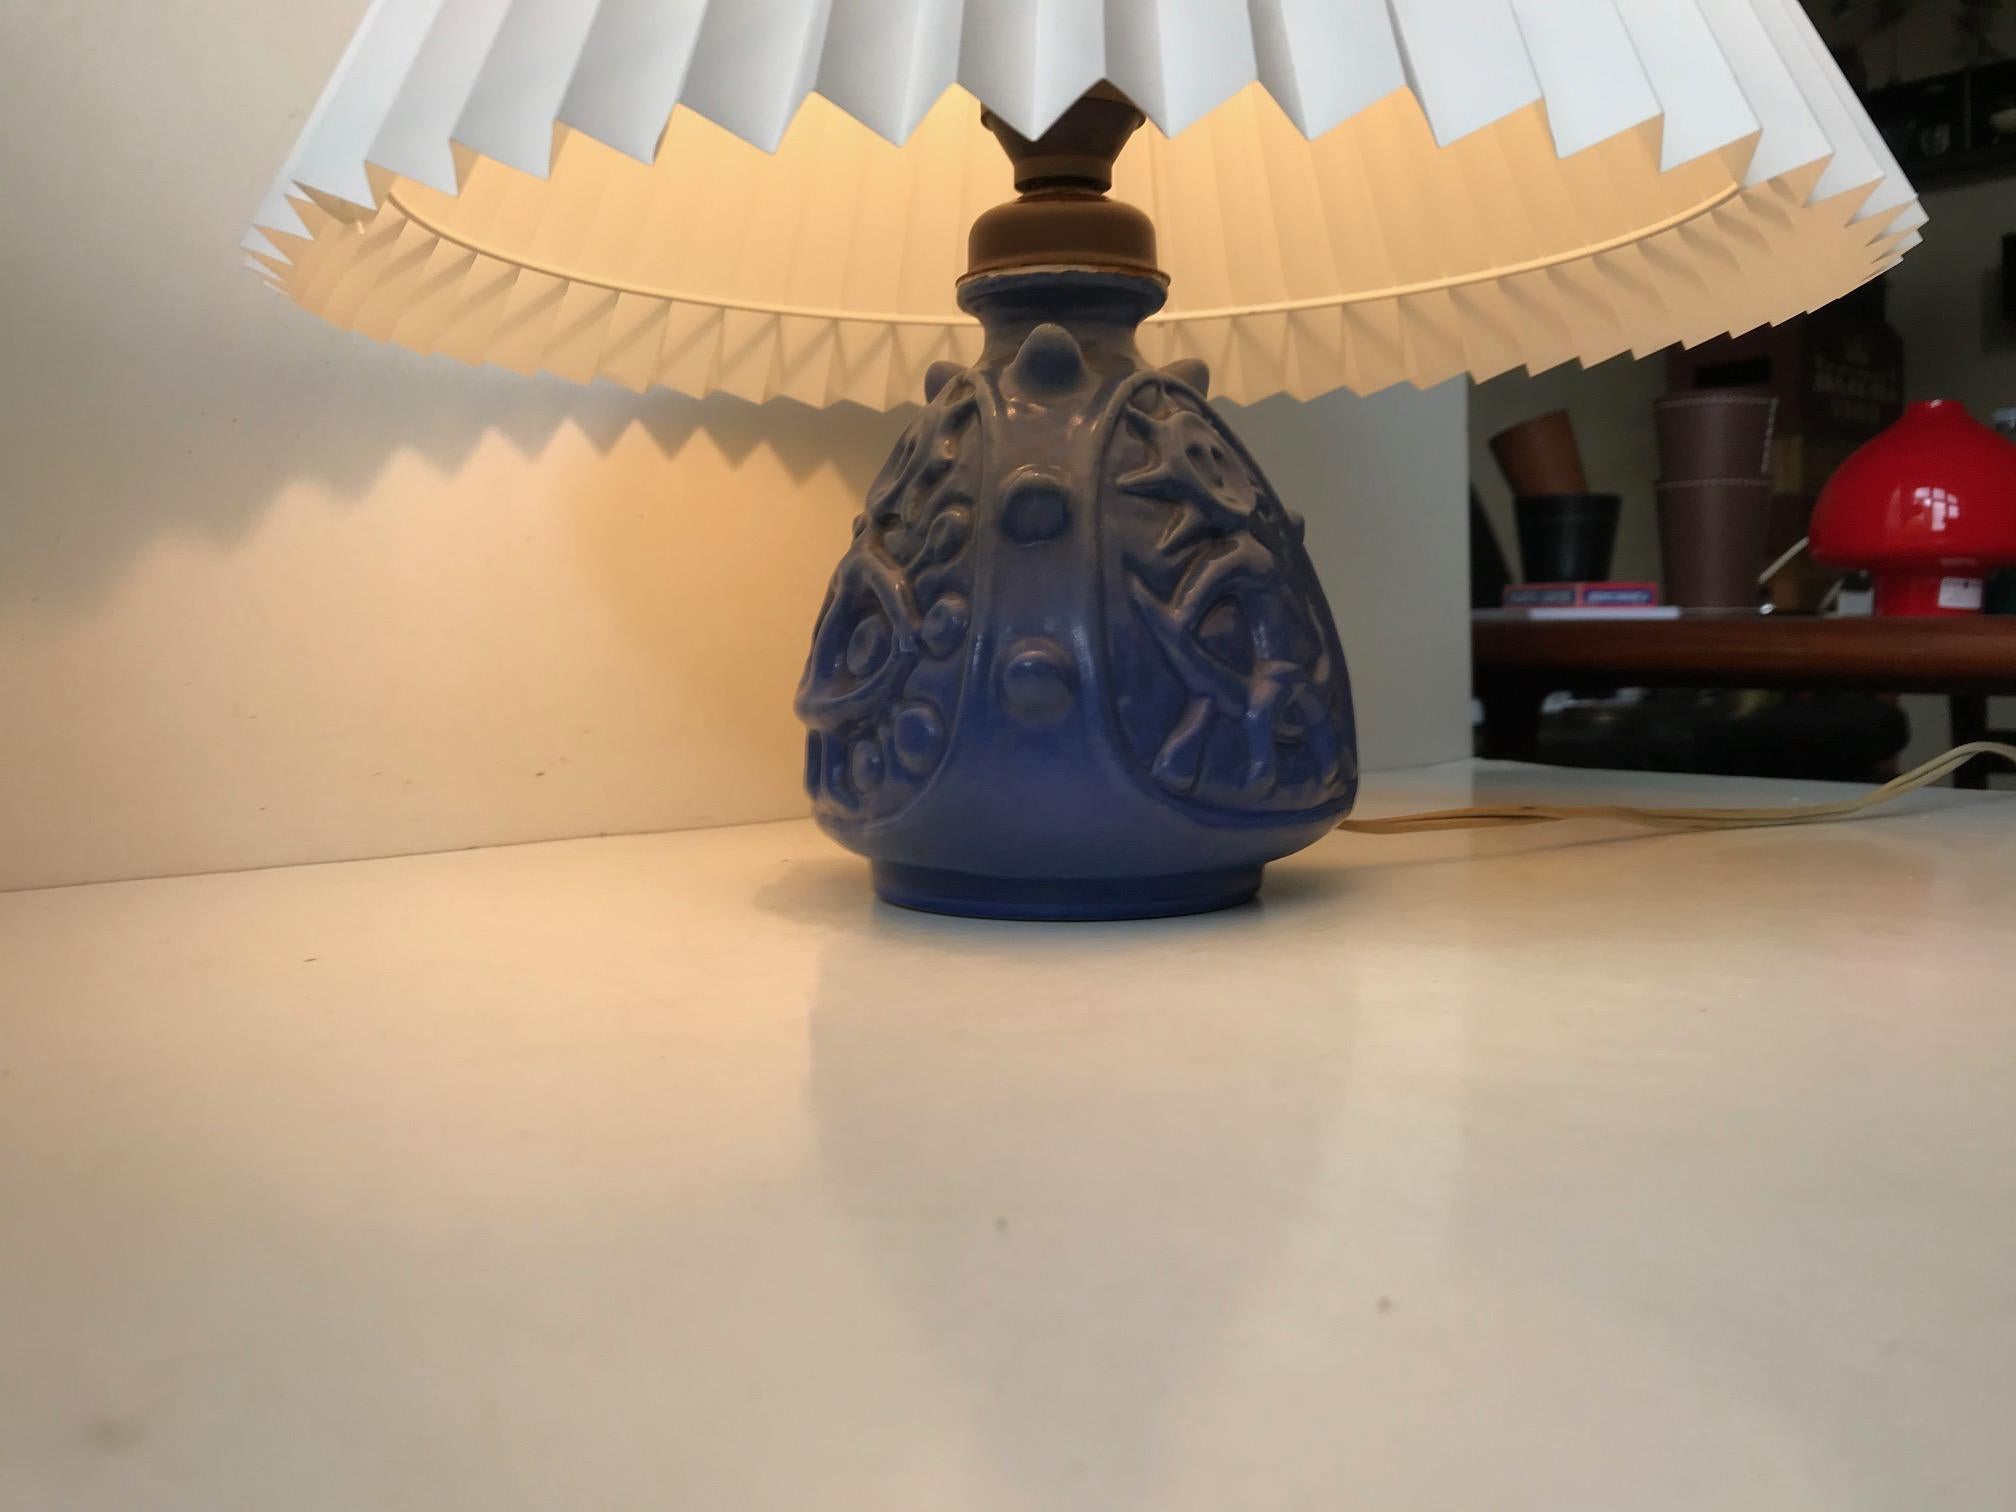 Spiky Blue Ceramic Table Lamp with Troll by Lauritz Hjorth, 1940s For Sale 1